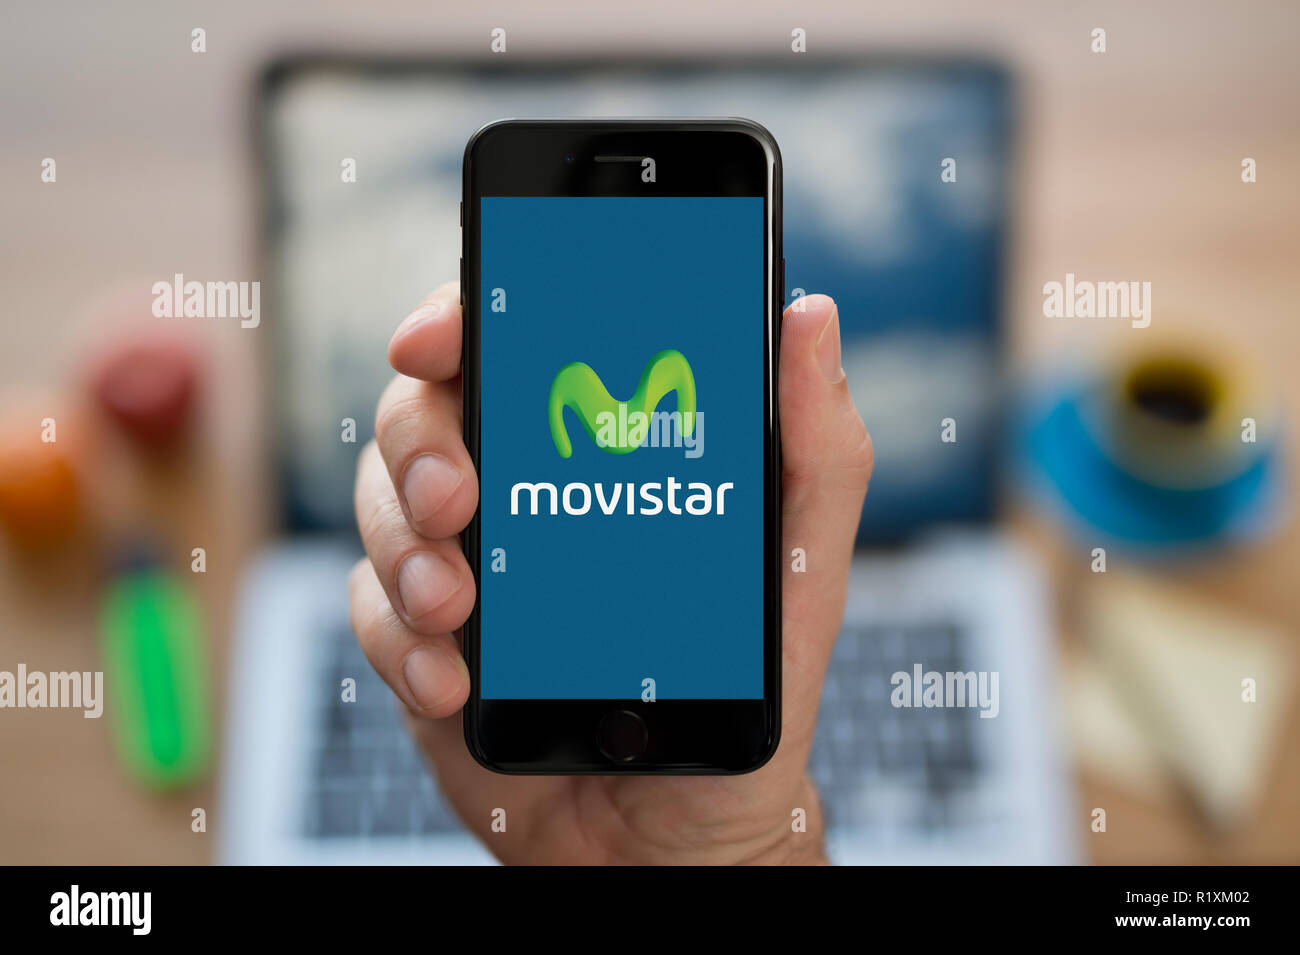 A man looks at his iPhone which displays the Movistar logo, while sat at his computer desk (Editorial use only). Stock Photo